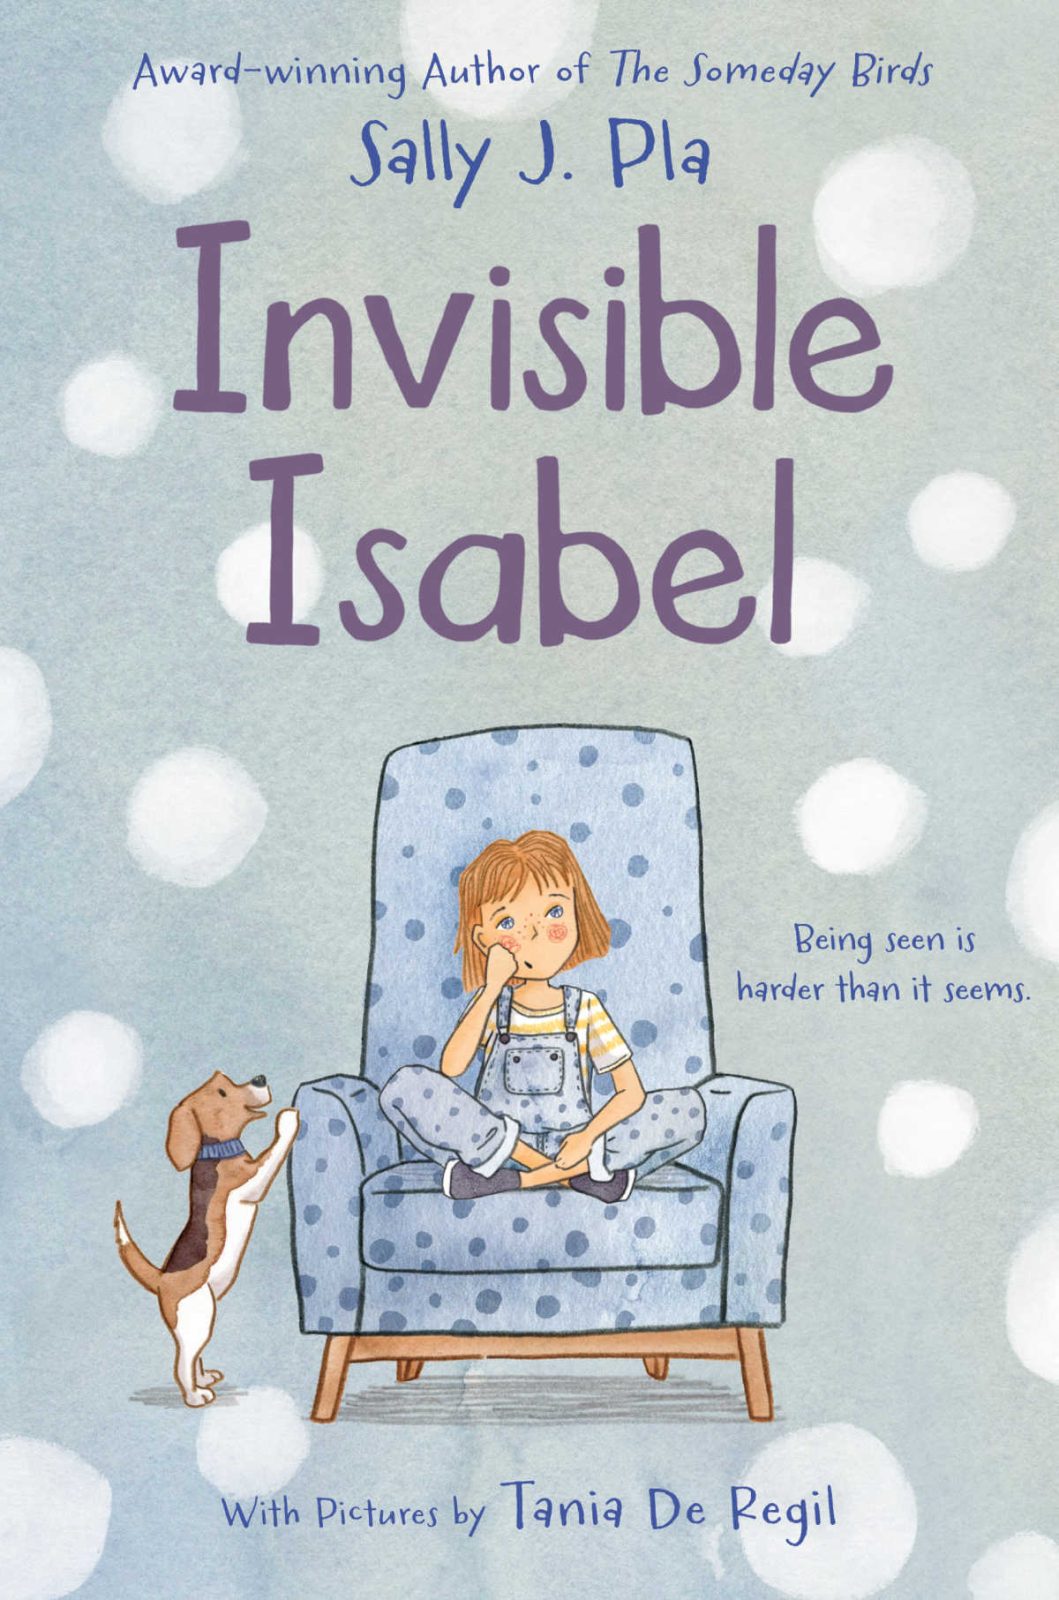 Invisible Isabel by award-winning author Sally J. Pla is a heartwarming story about overcoming social anxiety, finding your voice, and making friends. It is perfect for kids around ages 8-12.